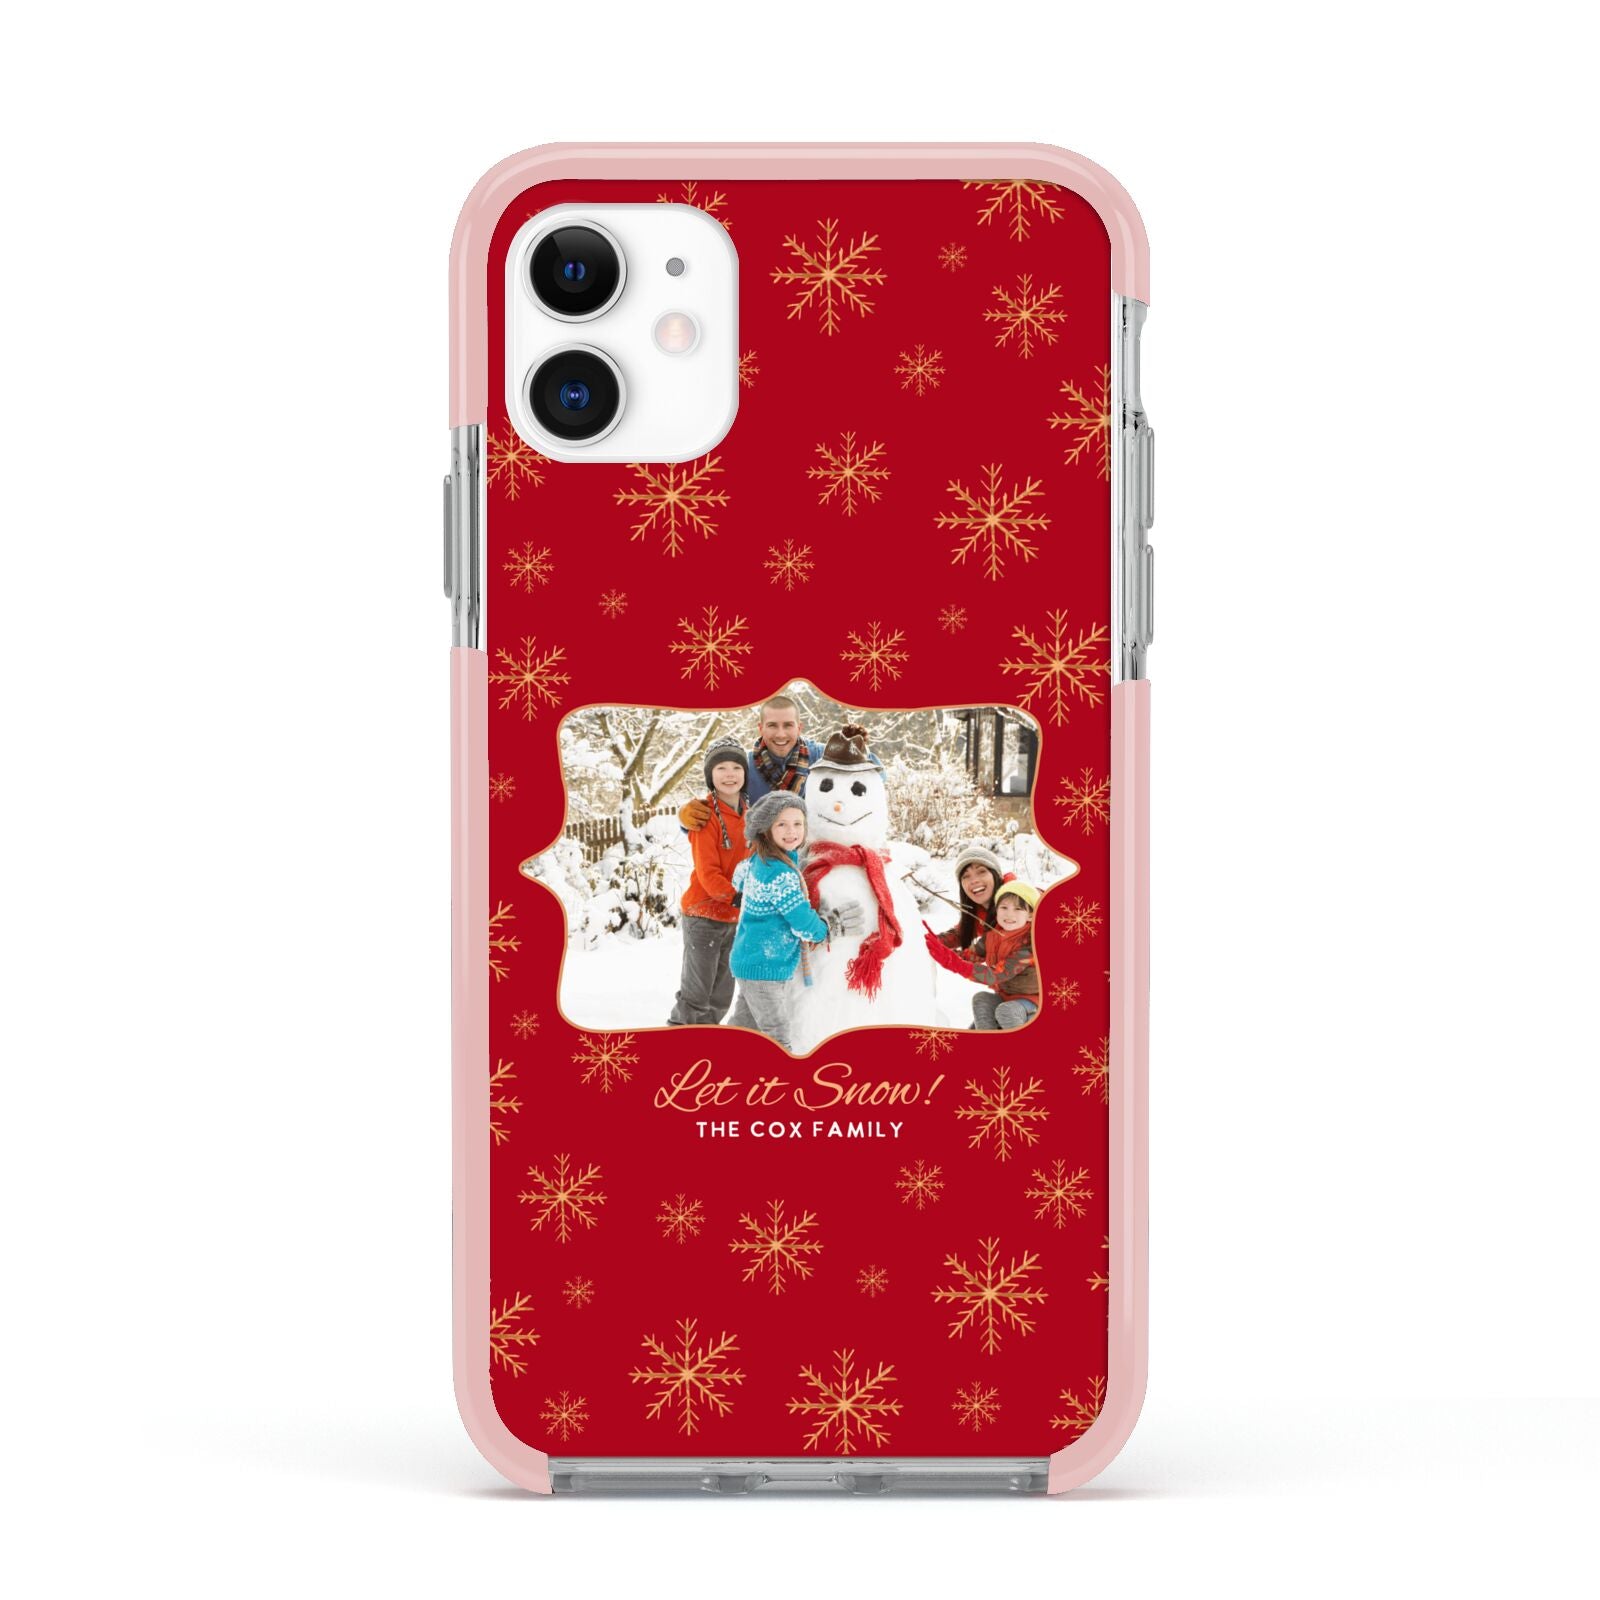 Let it Snow Christmas Photo Upload Apple iPhone 11 in White with Pink Impact Case